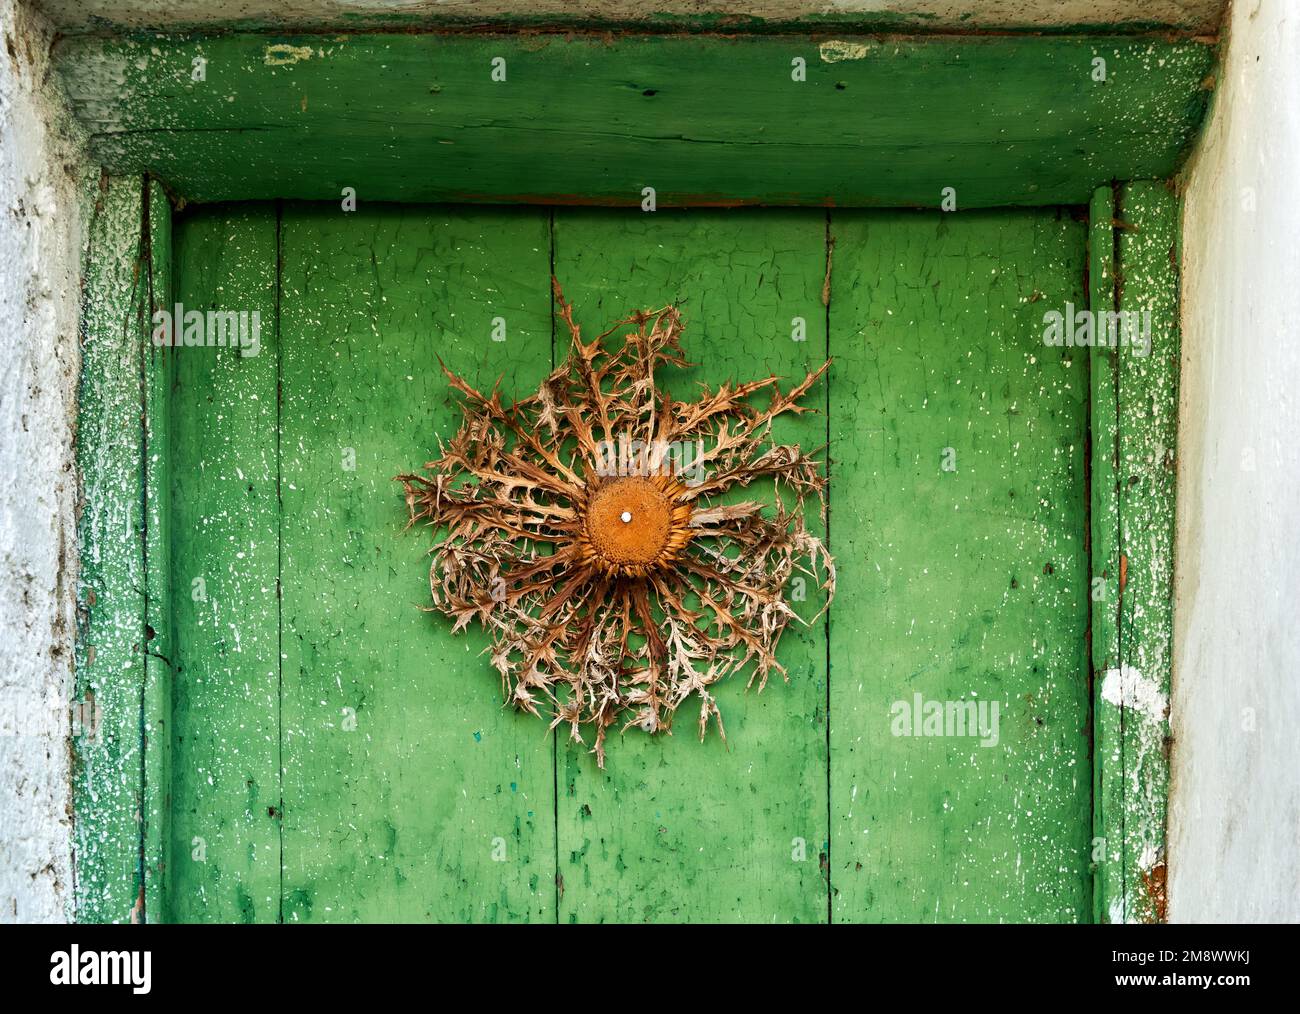 Eguzkilore (Carlina acanthifolia) nailed on a door, to avoid witches, spirits and protect the house, according to Basque mythology. Stock Photo